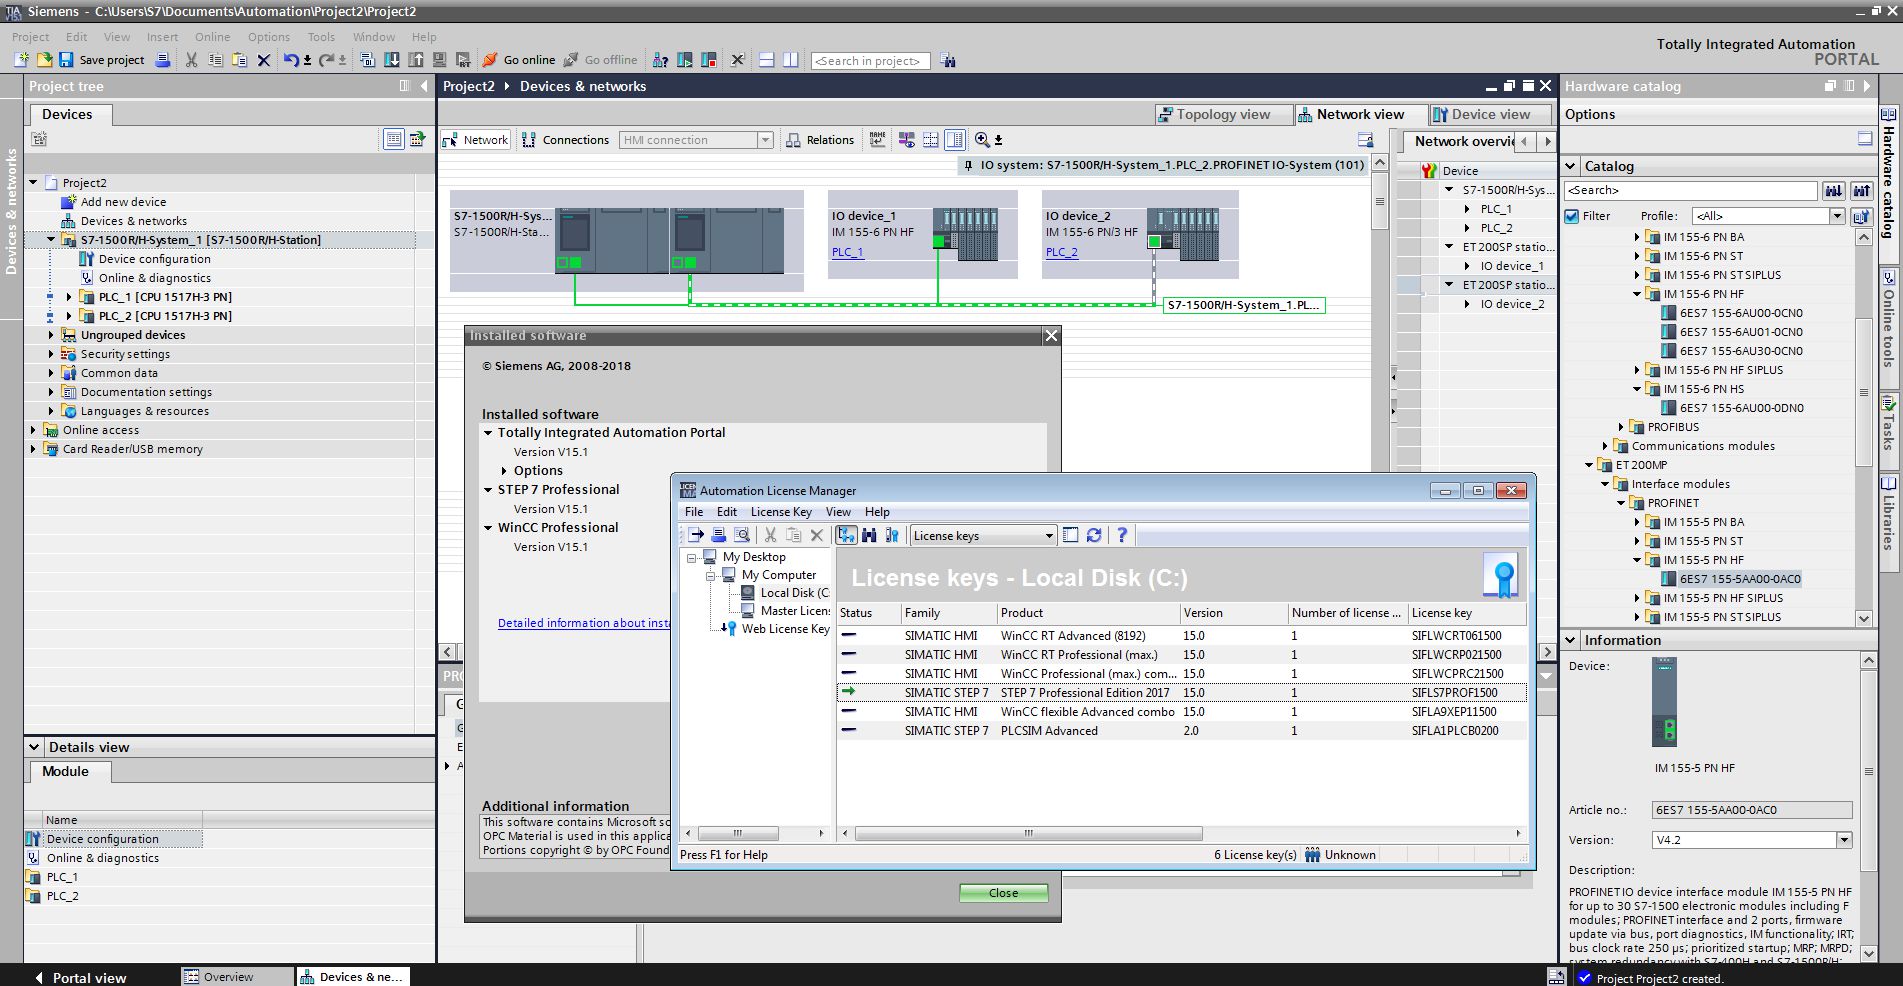 Working with Siemens Simatic TIA Portal v15.1 full license